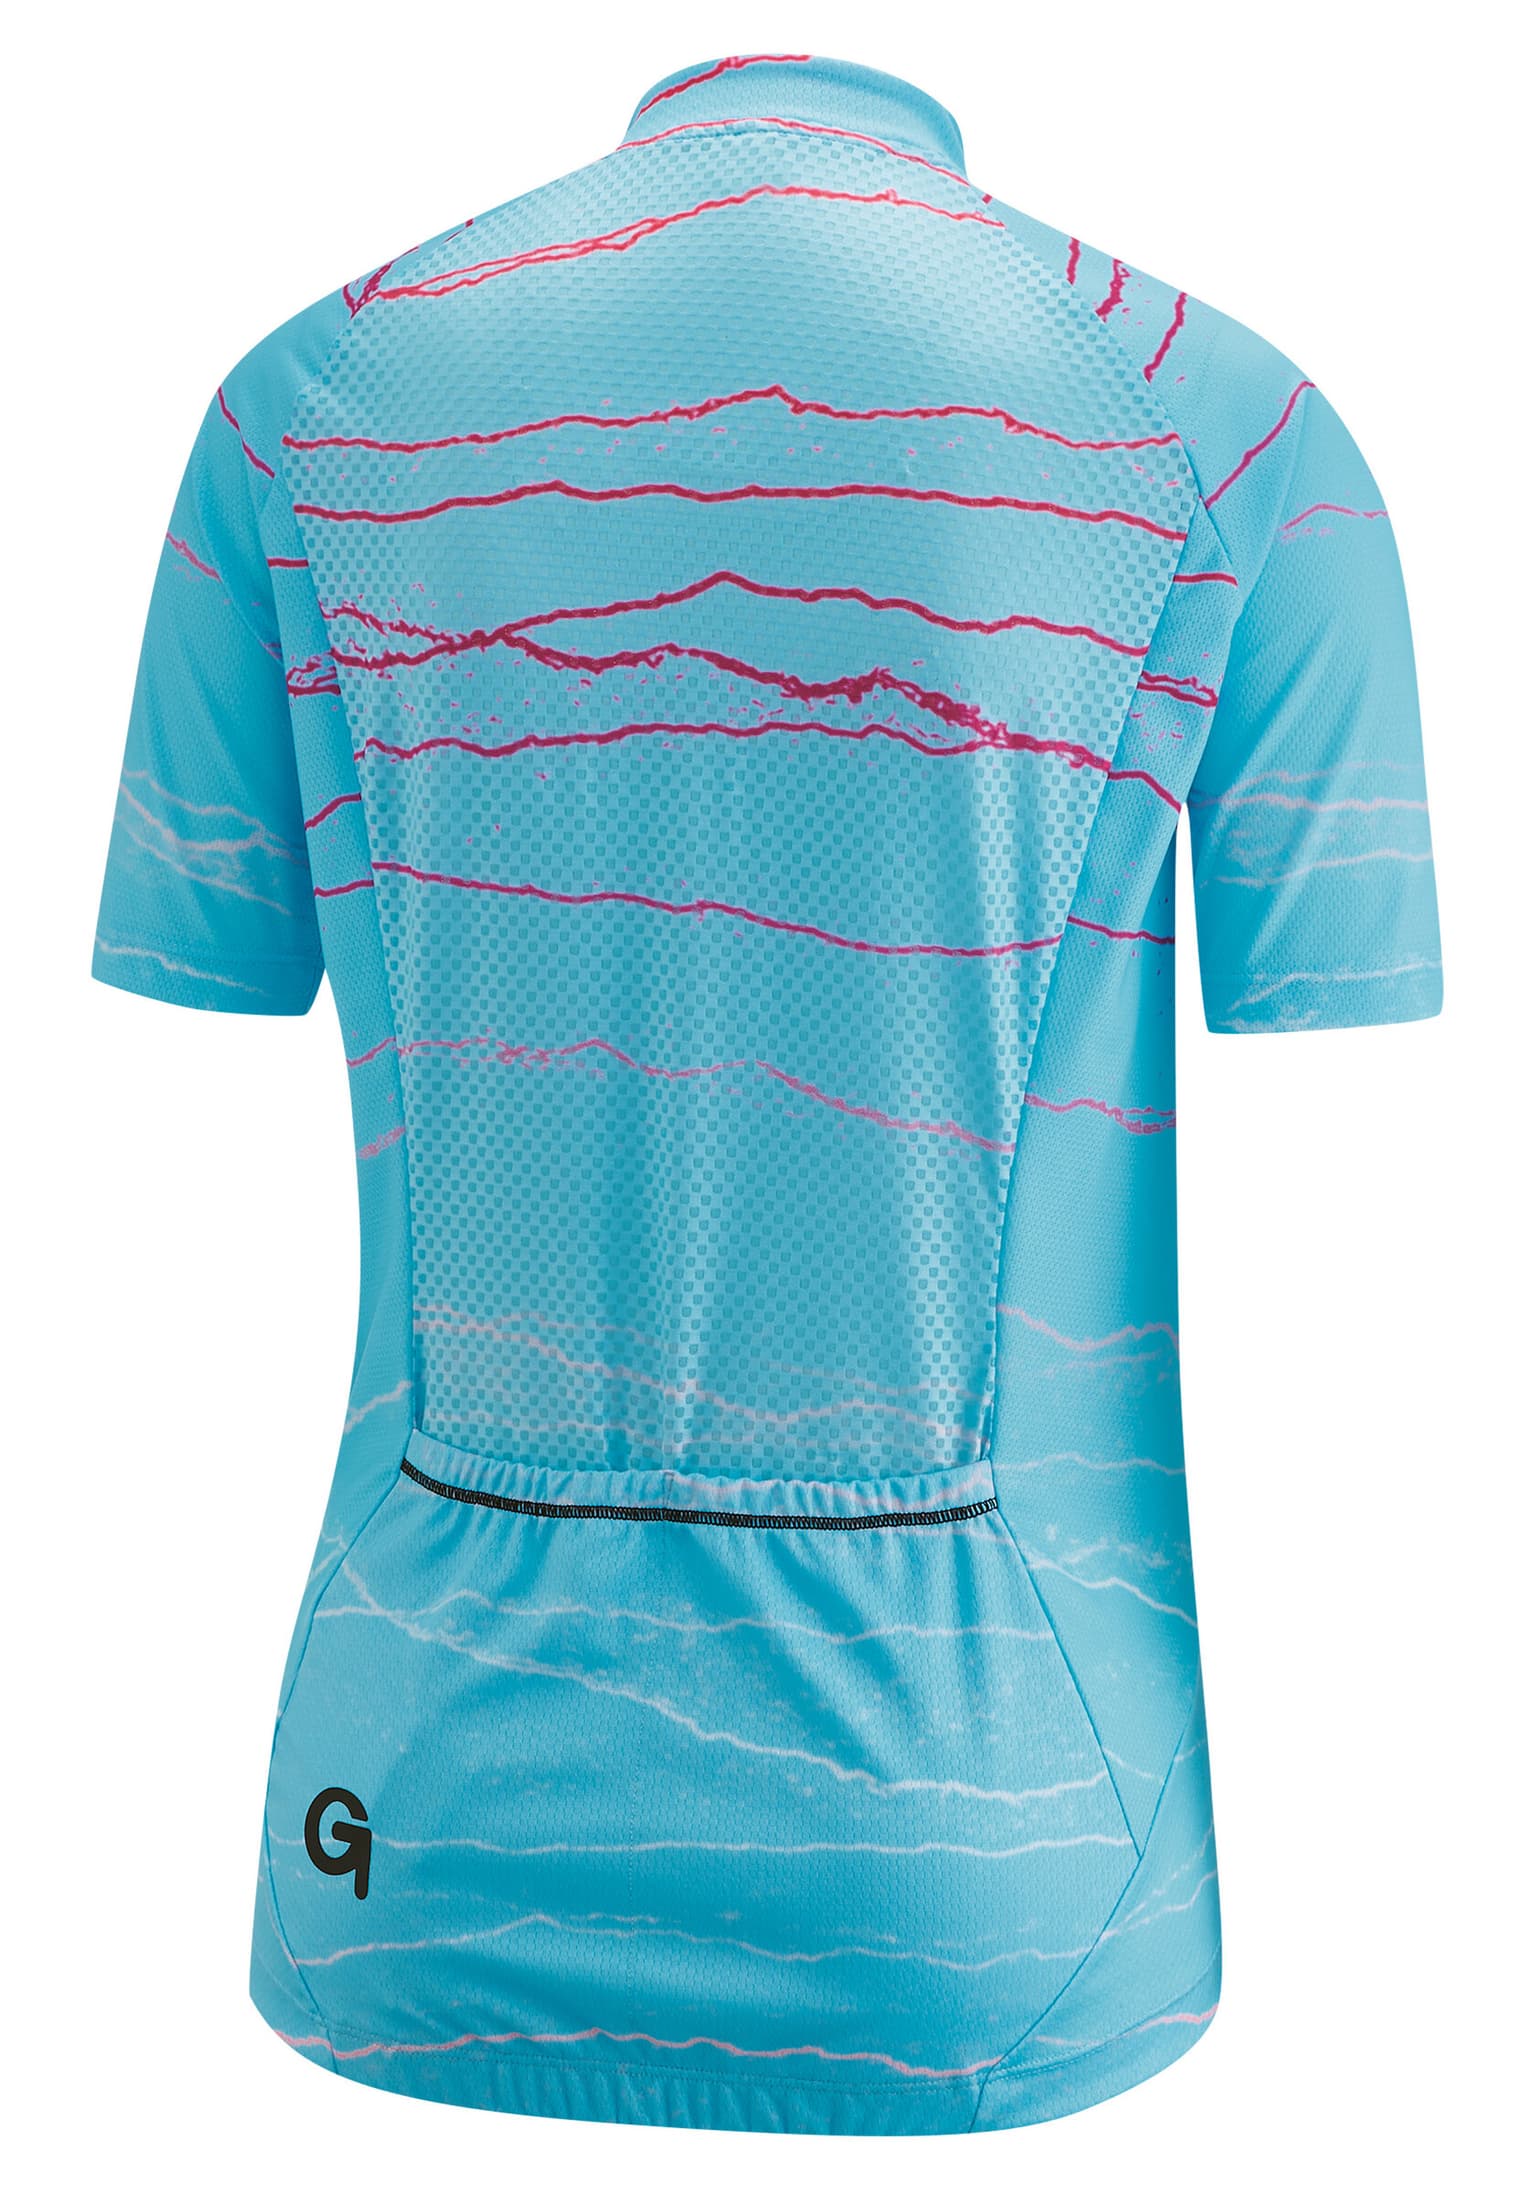 Gonso Gonso Veliki Chemise de vélo turquoise-claire 2